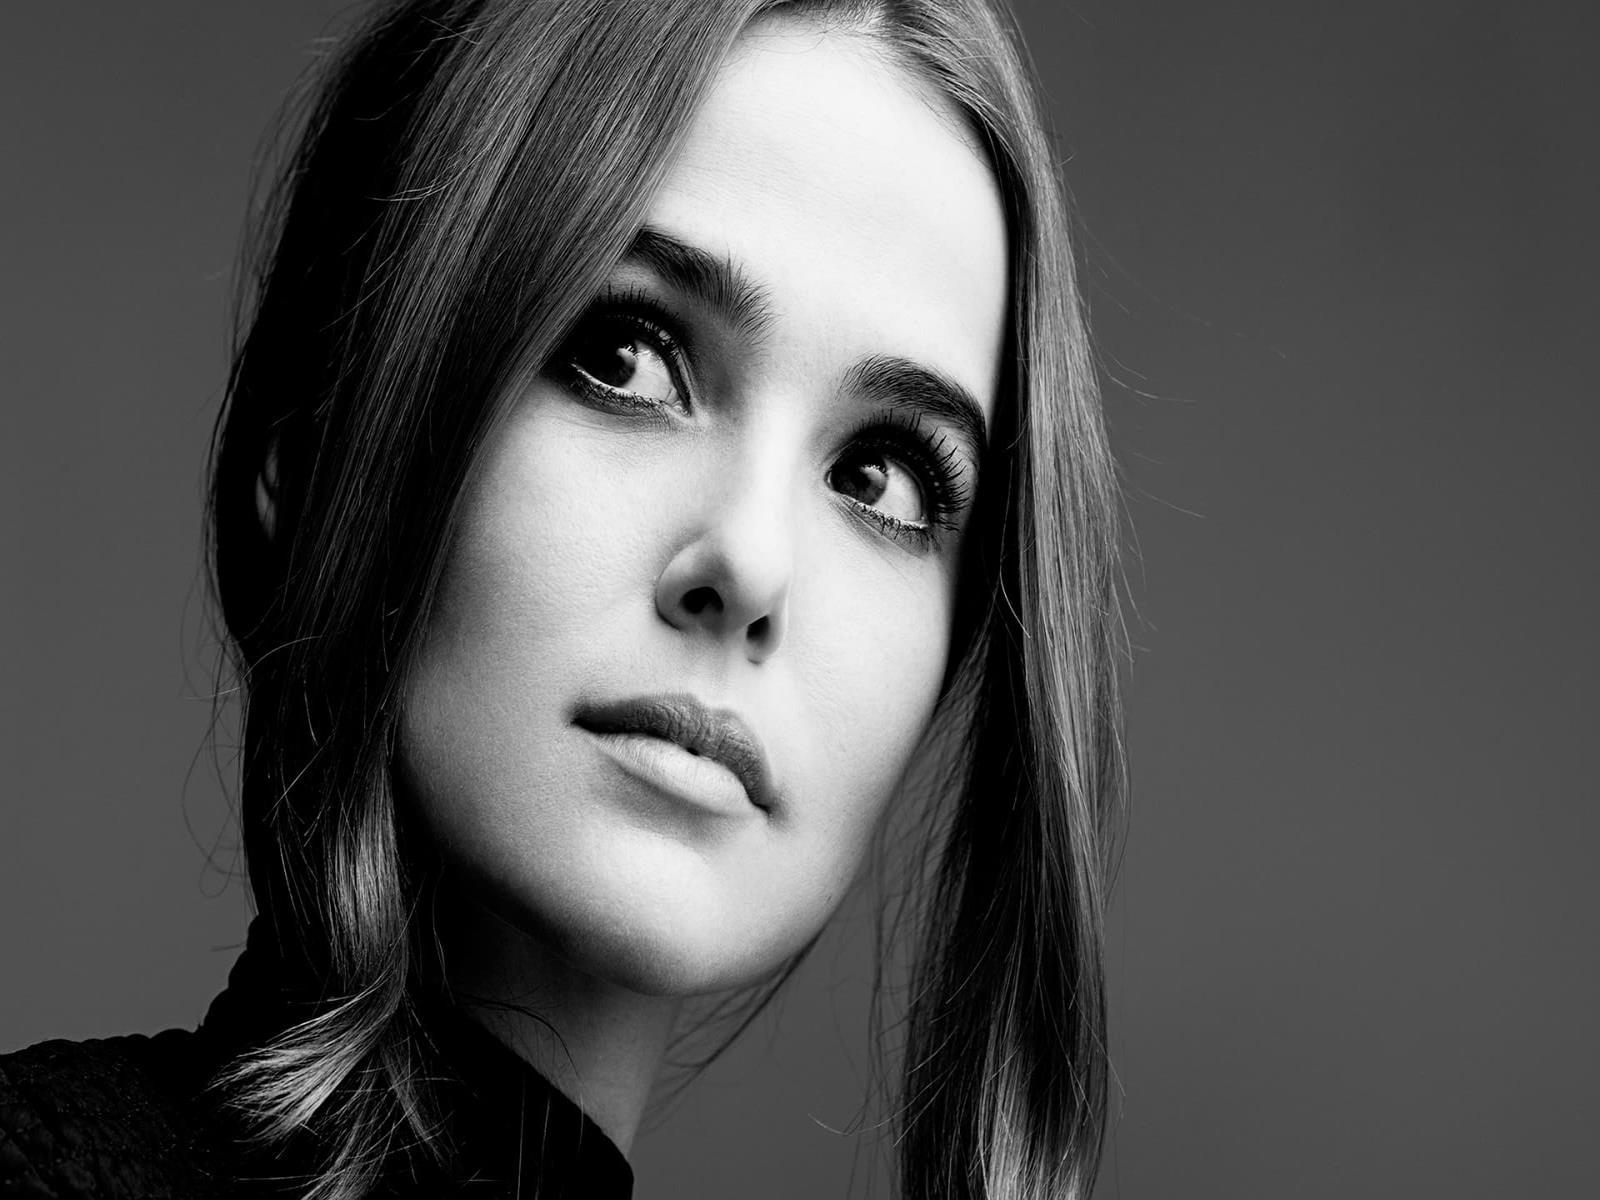 zoey deutch black and white background wallpaper high quality